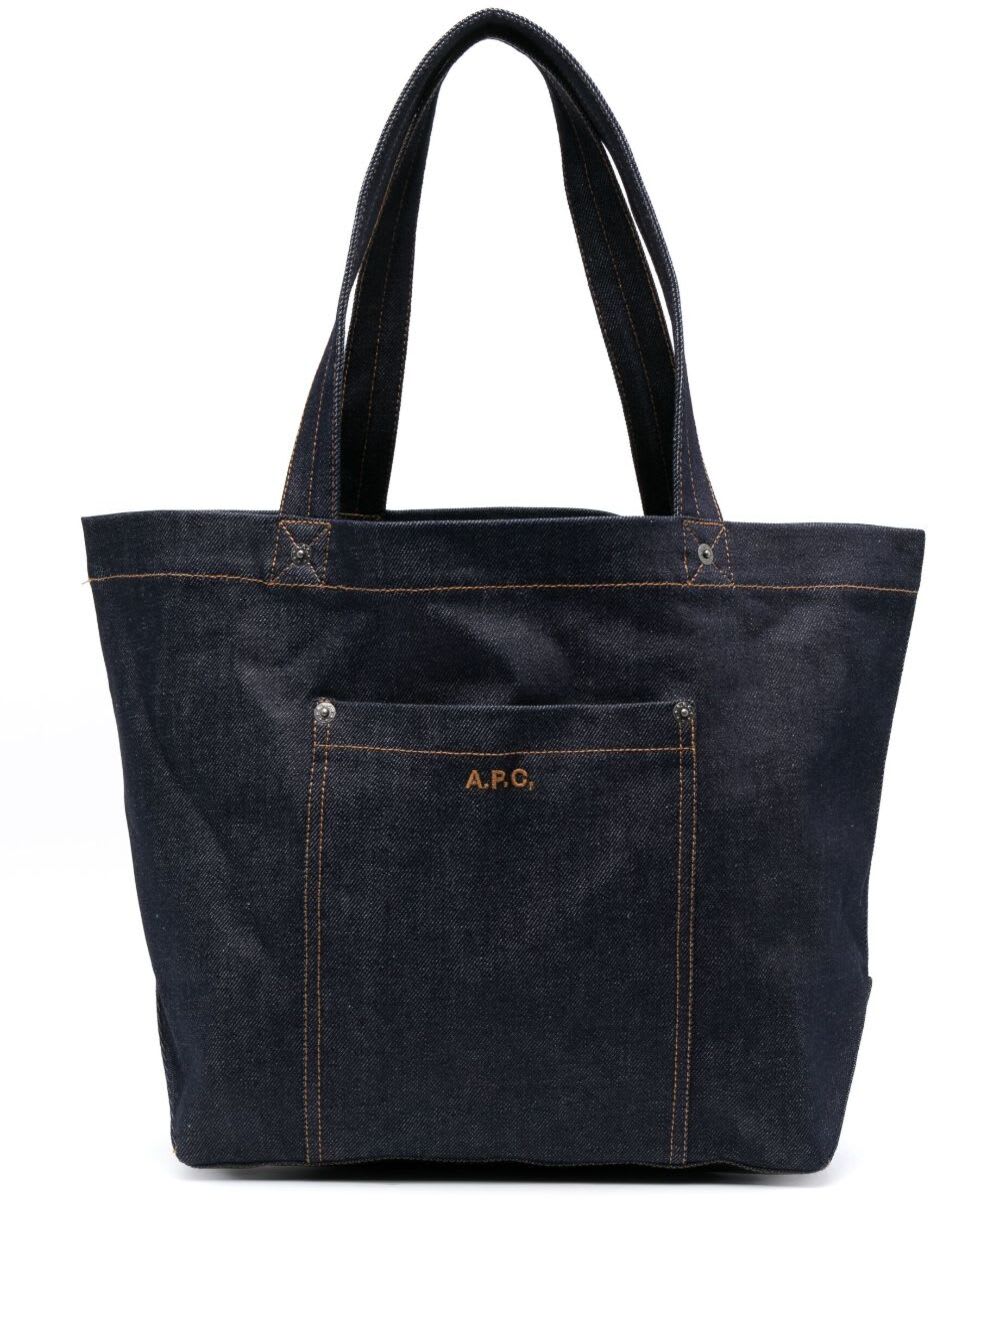 APC THAIS BLUE TOTE BAG WITH LOGO EMBROIDERY AND FRONT POCKET IN COTTON BLEND DENIM WOMAN